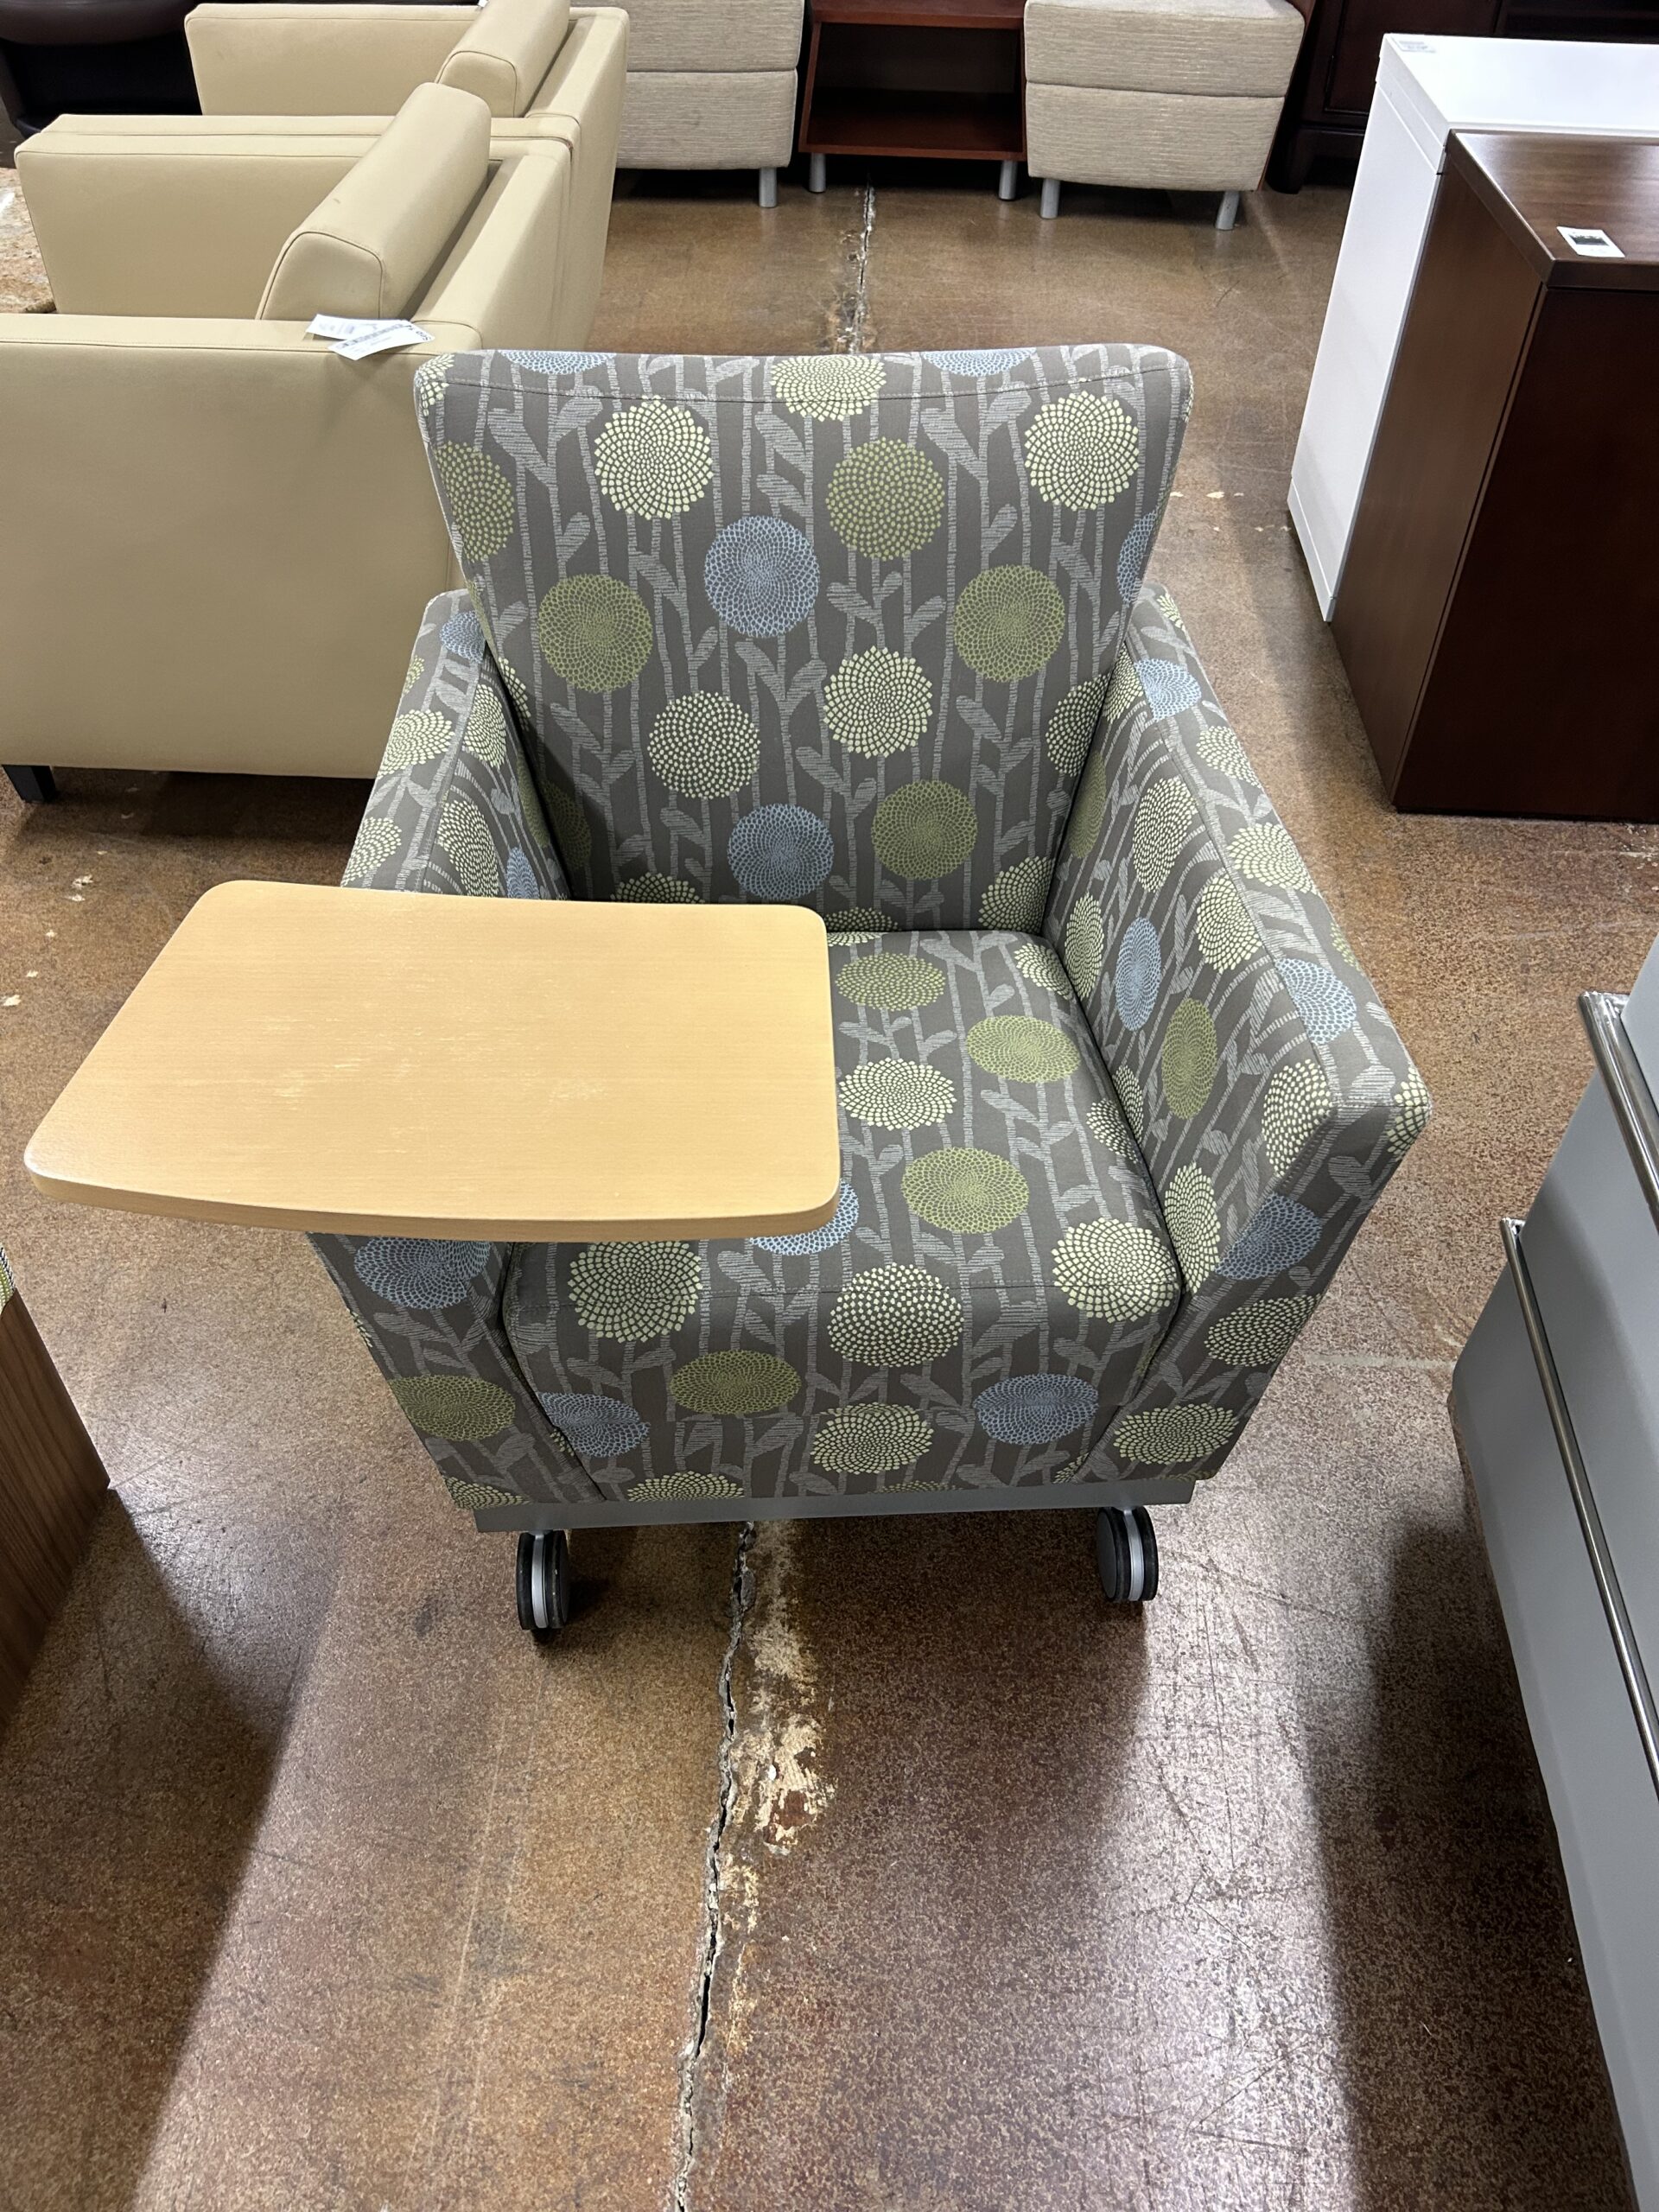 Used Arcadia Patterned Lounge Club Chair with Desk on Casters 32"W